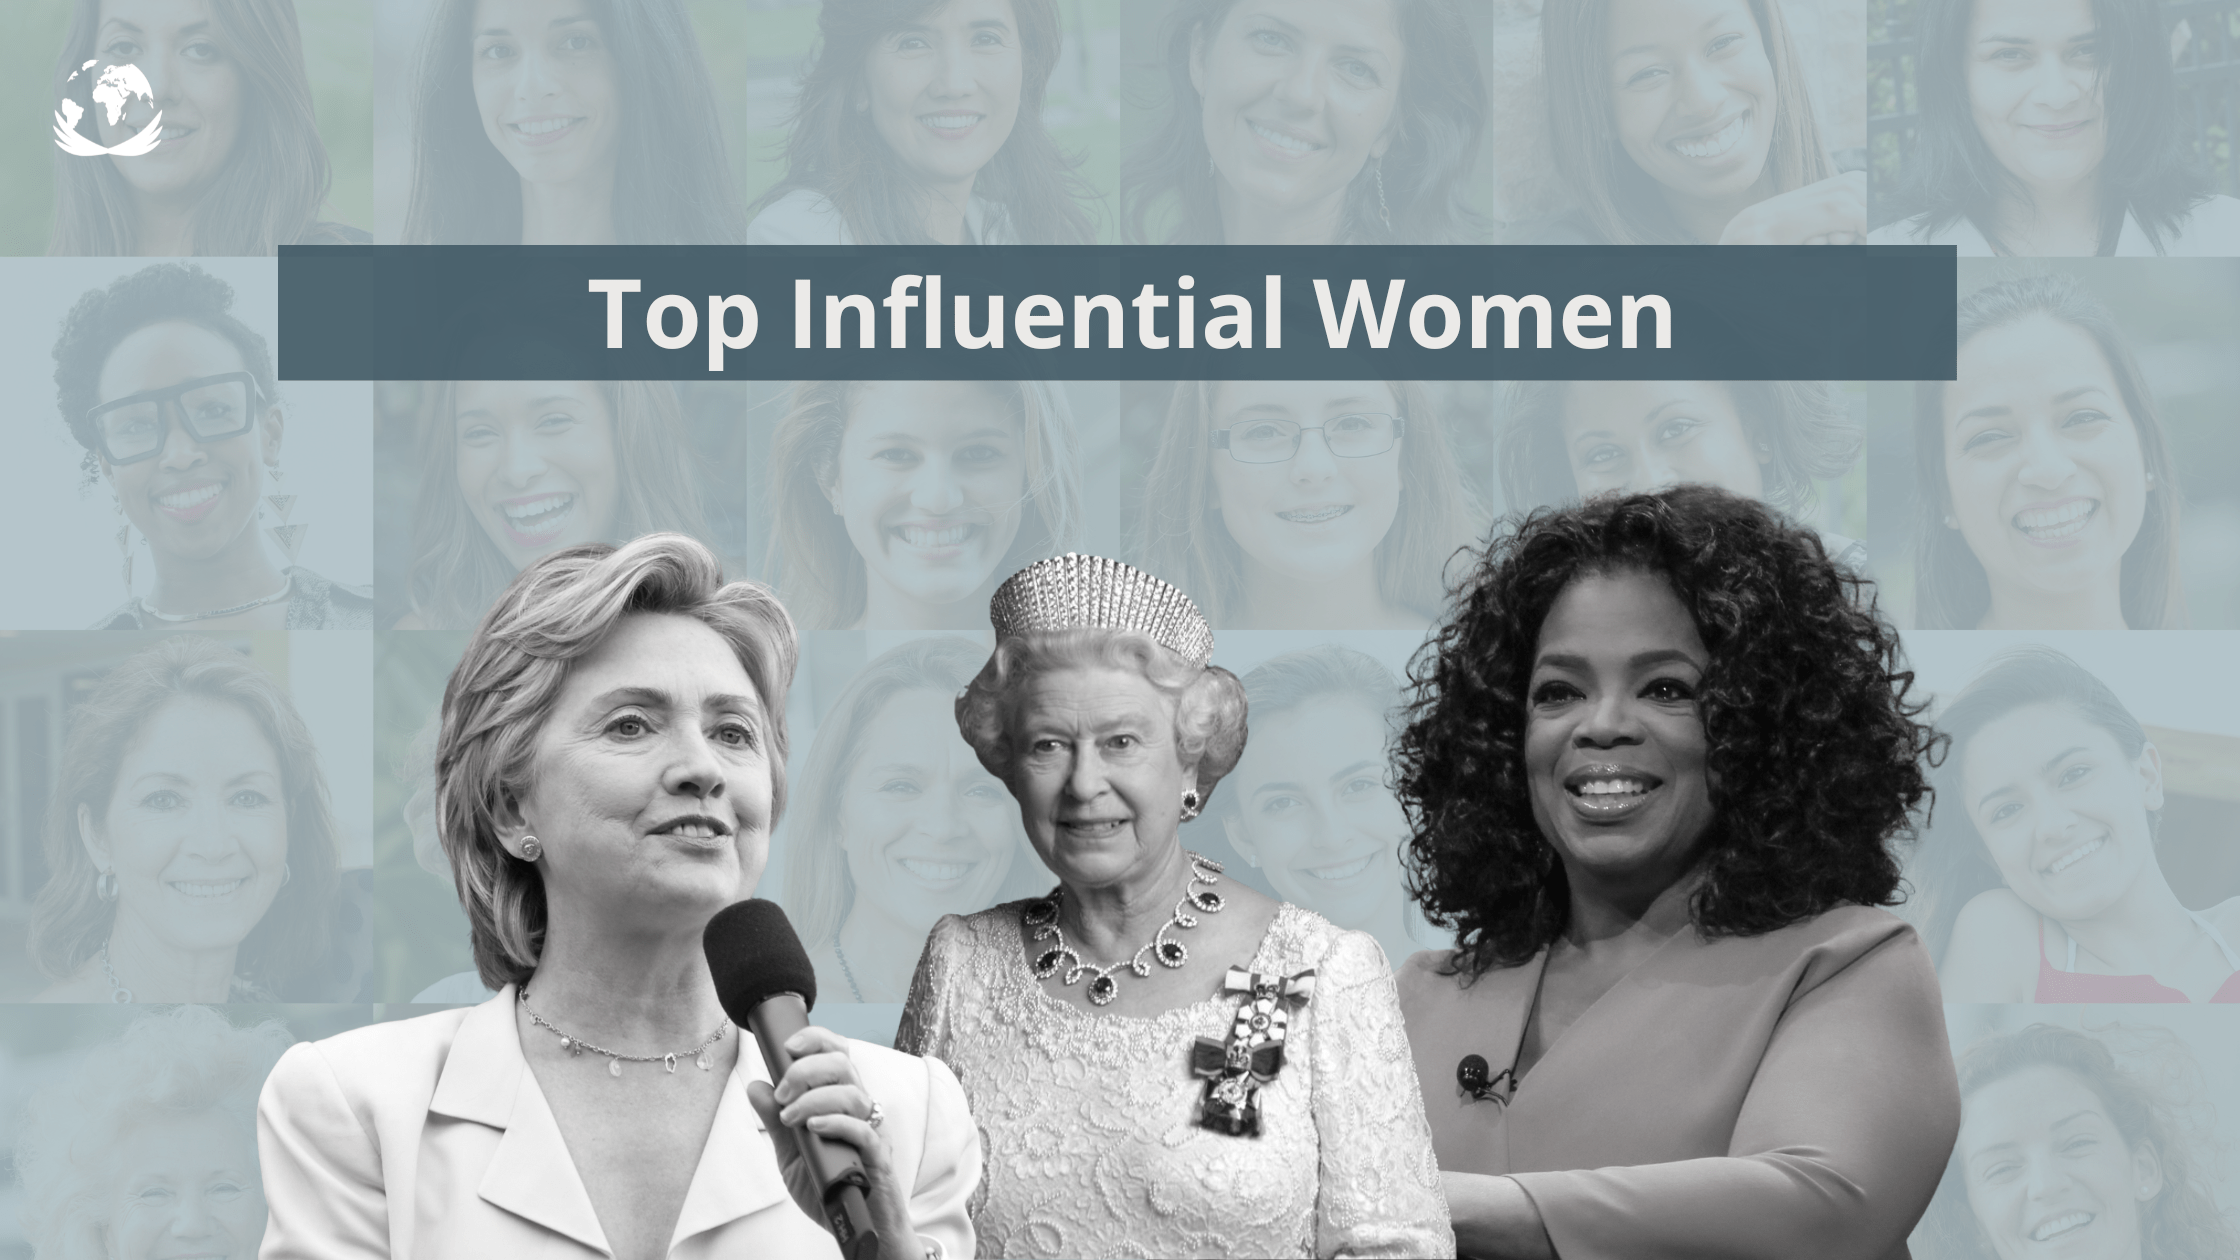 The Top 10 Influential Women?